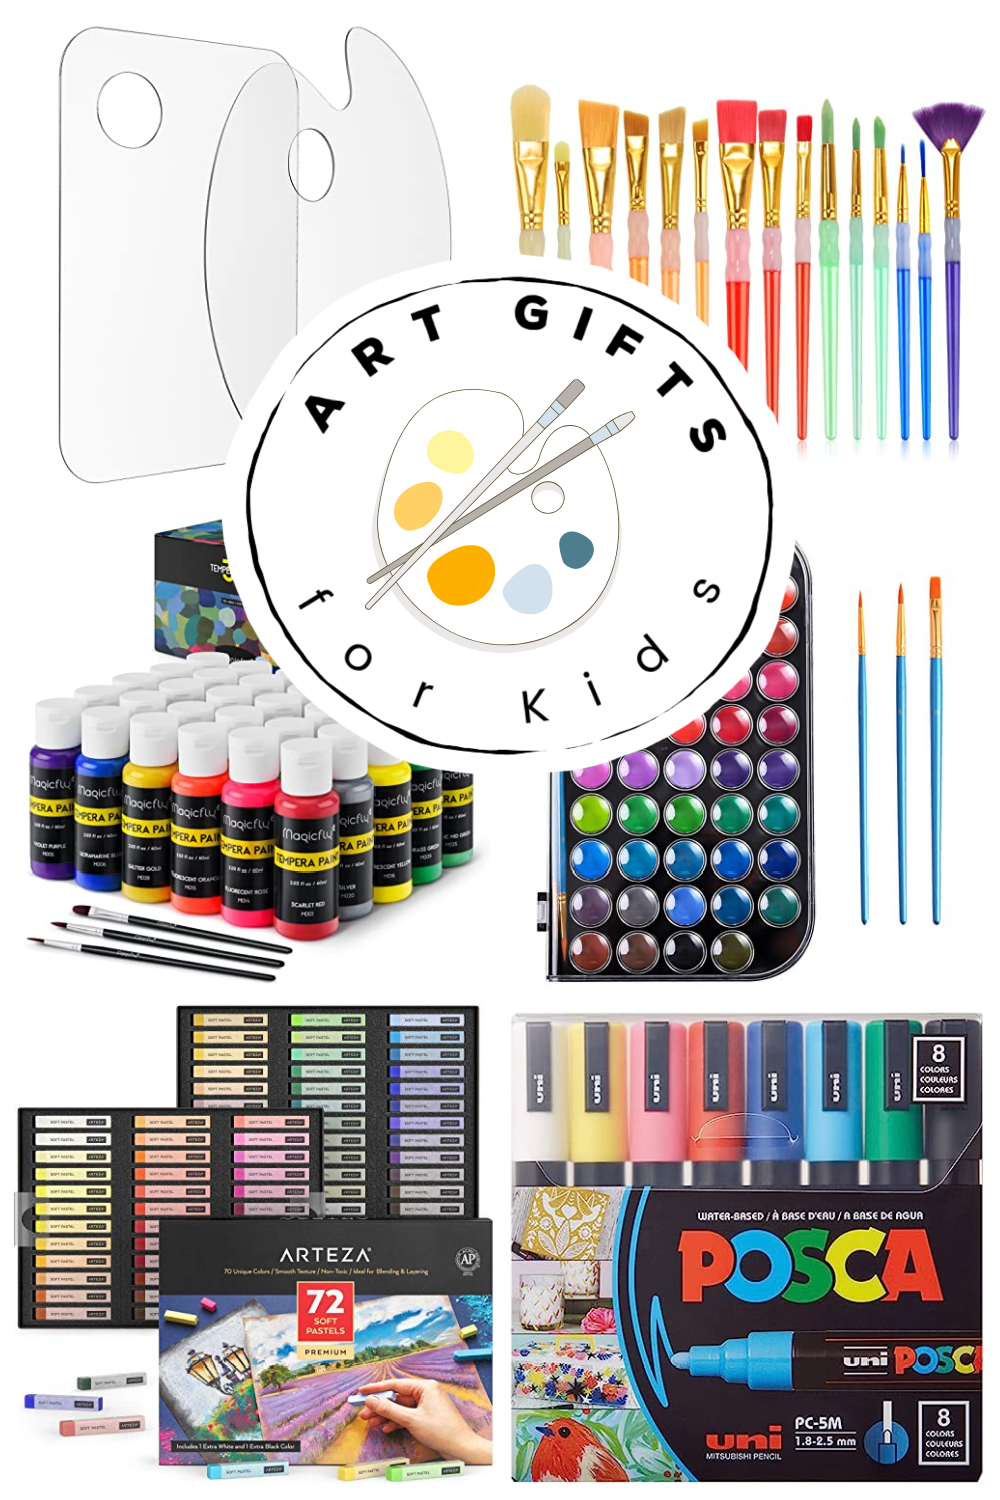 Caliart Art Supplies Drawing Supplies Premium Art Set Sketching Kit with  100 Sheets 3-Color Sketch Book Graphite Colored Charcoal Watercolor &  Metallic Pencils for Artists Adults Teens Beginners